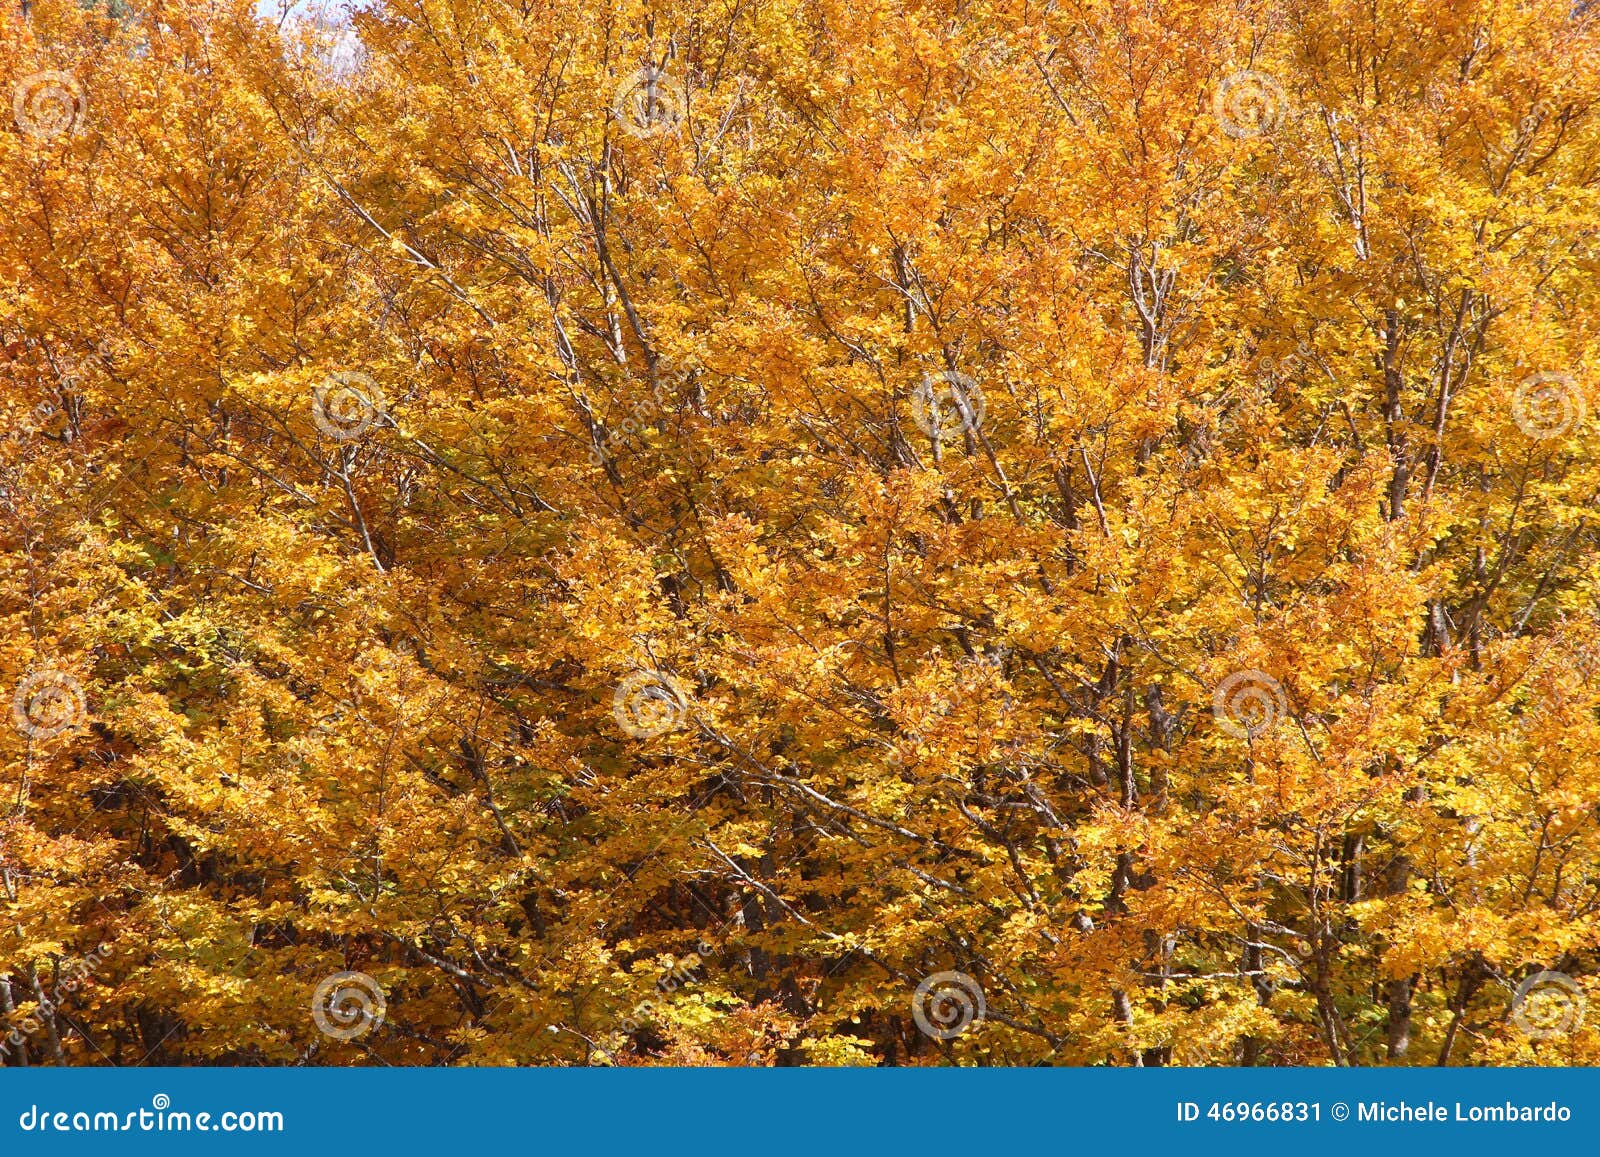 beeches in autumn, the branches and the leaves